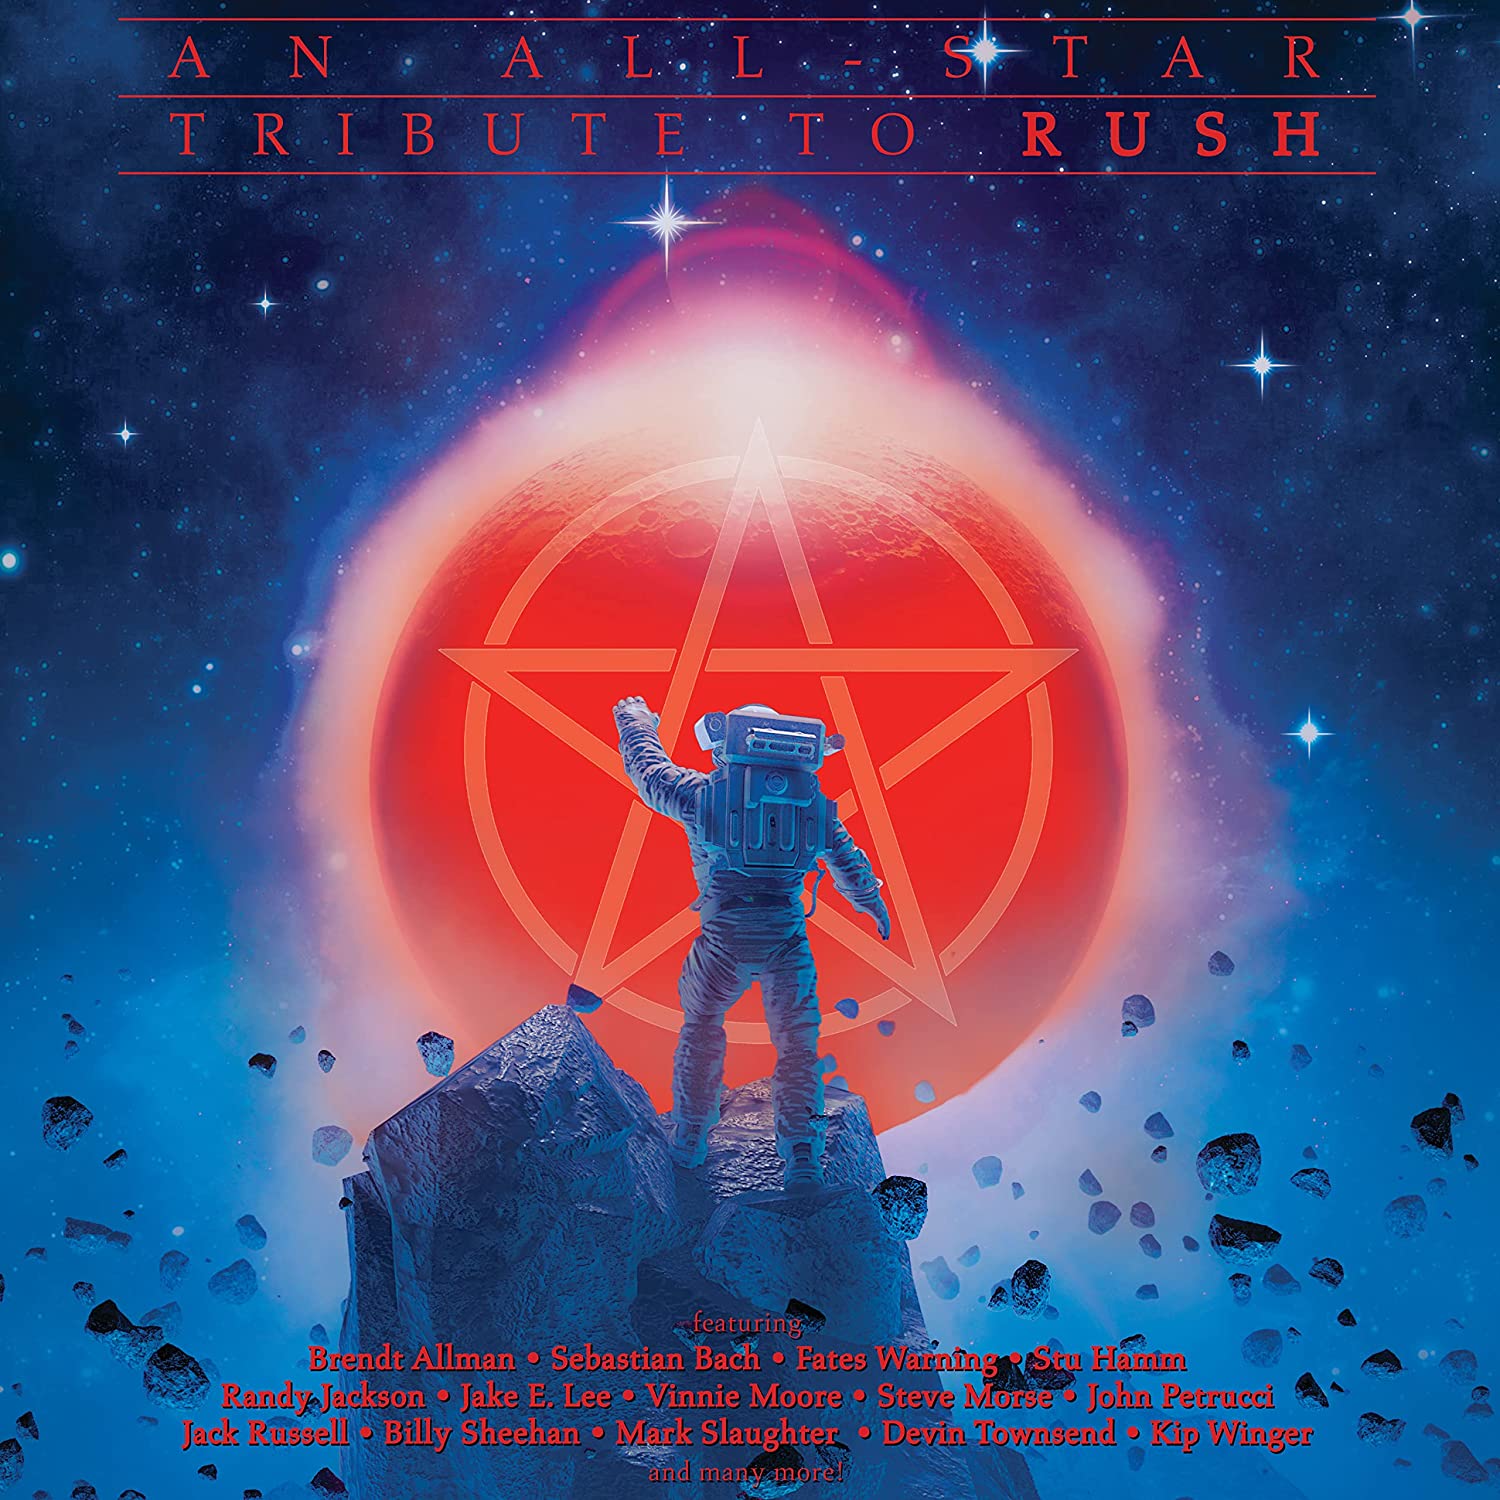 An all-star tribute to Rush - Various Artists